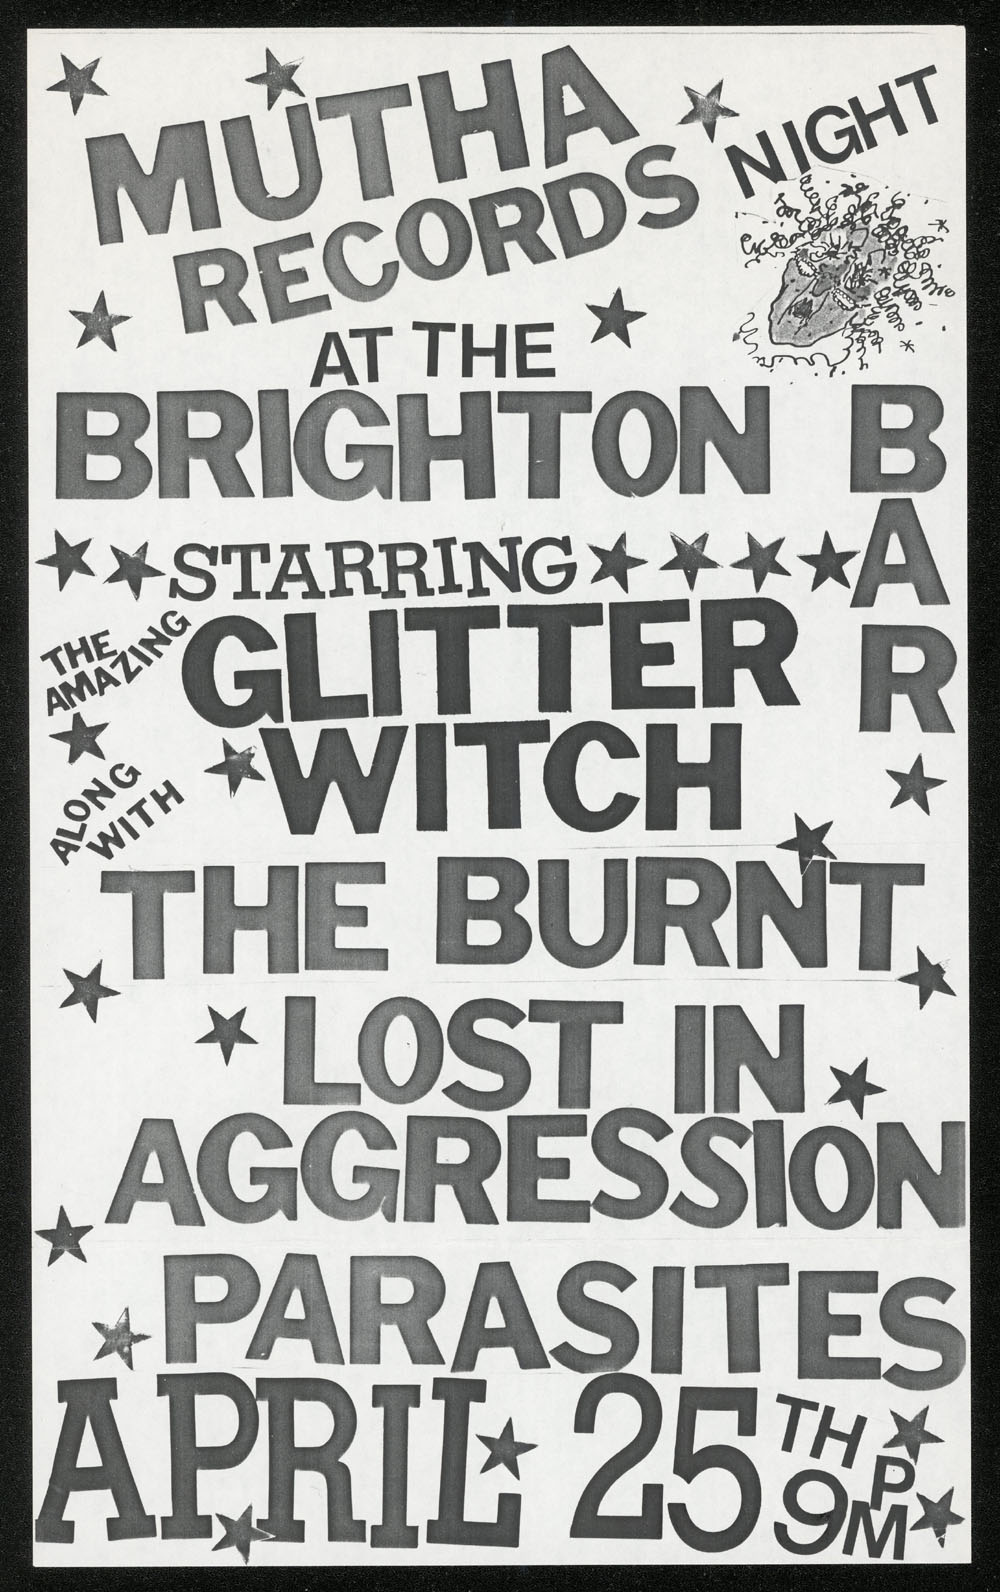 MUTHA RECORDS NIGHT w/ Lost In Aggression, Burnt, Glitter Witch, Parasites at Brighton Bar